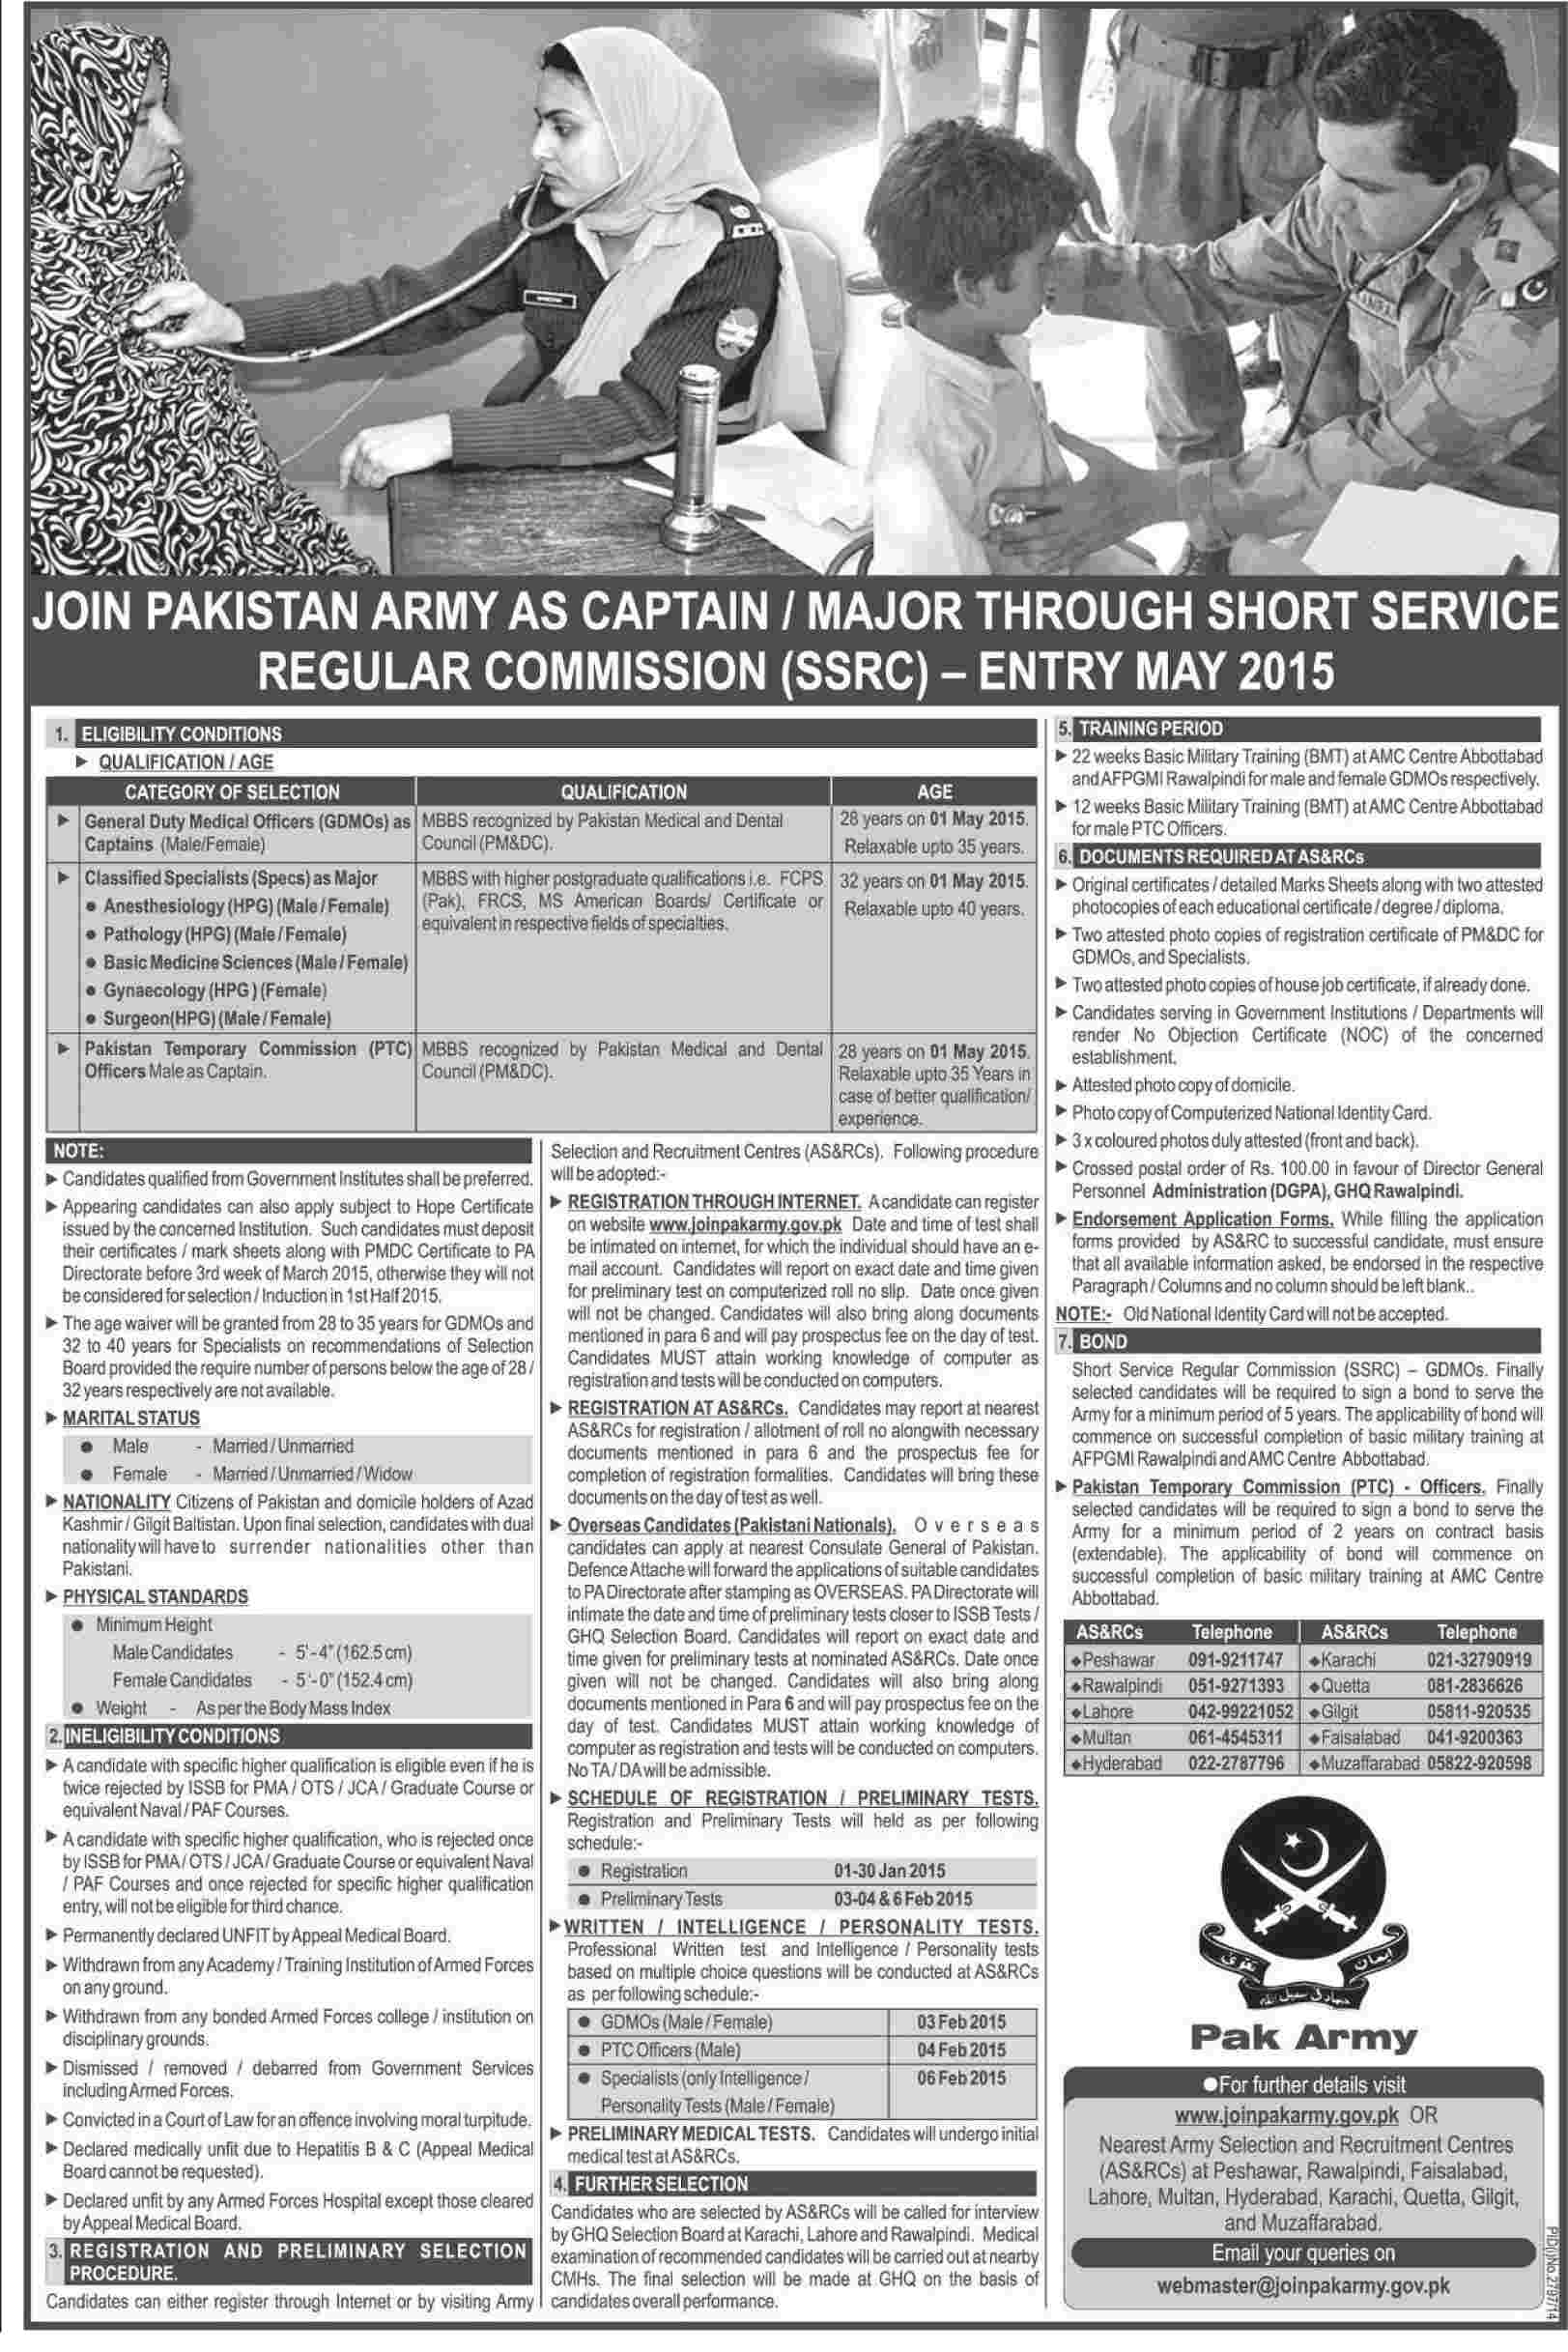 Join Pakistan Army As Captain / Major Through Short Service Regular Commission (SSRC) Entry May 2015